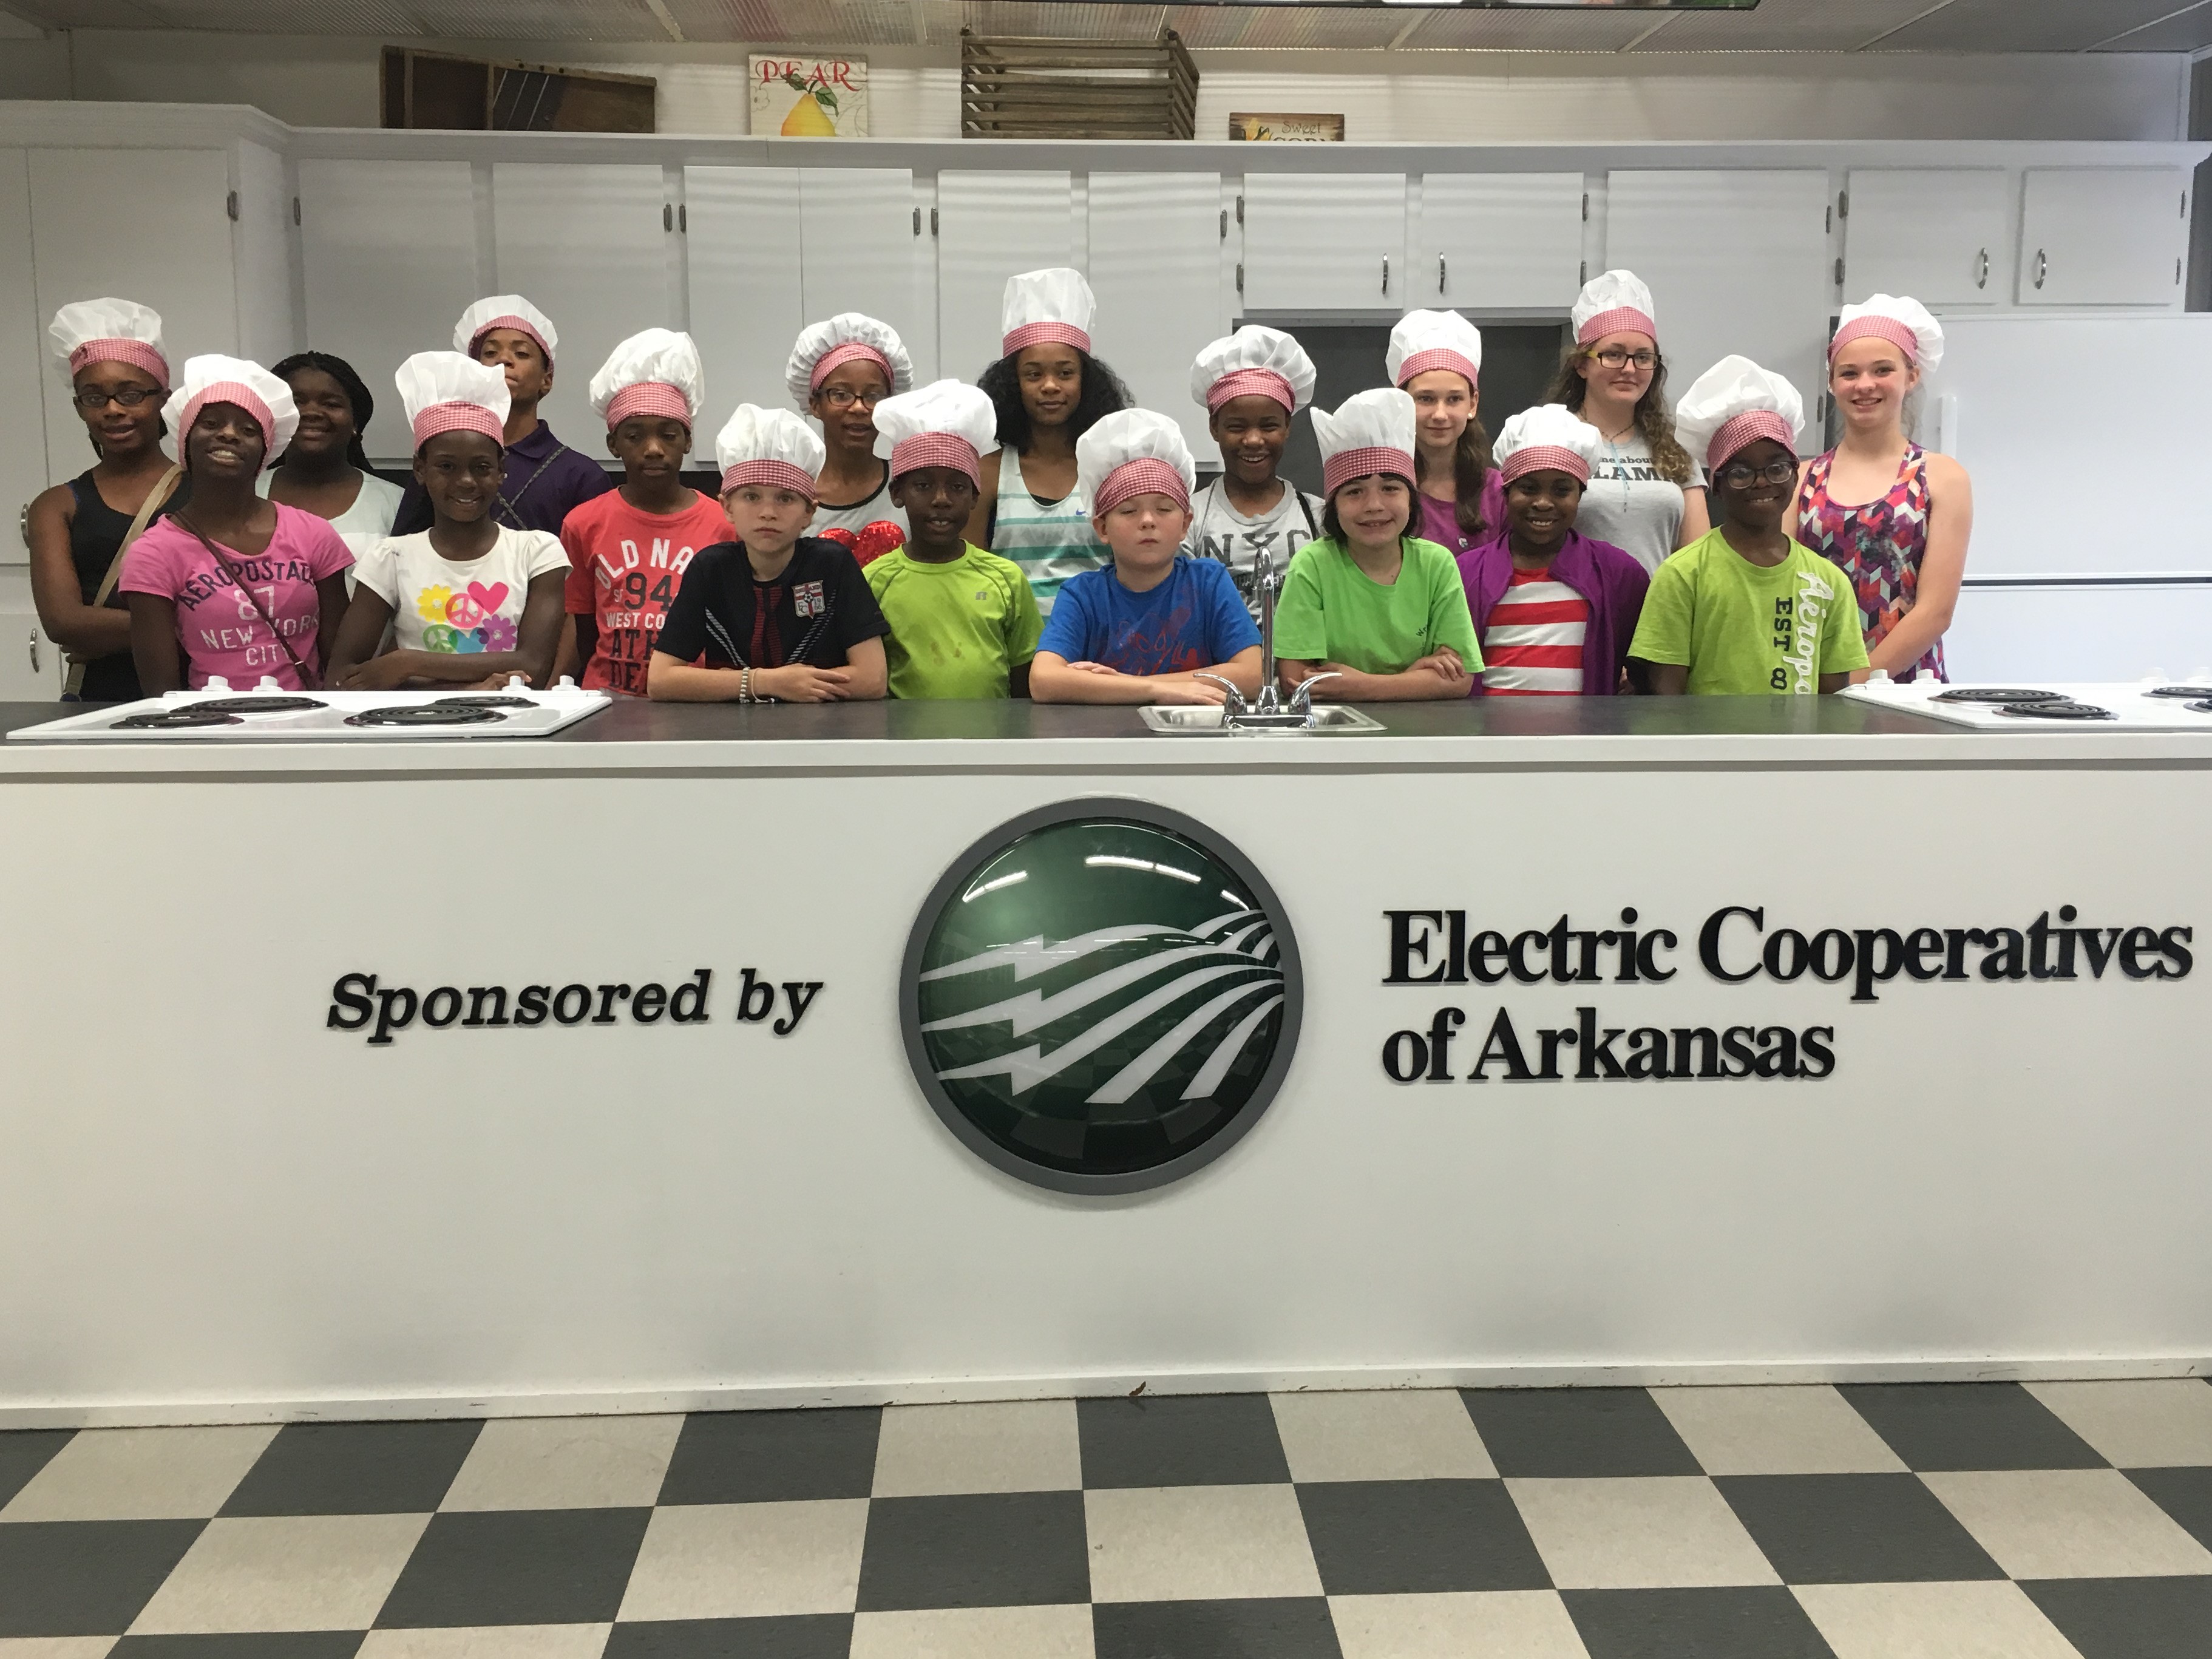 Several 4H members posing for a picture behind a demonstration kitchen during a cooking class.  